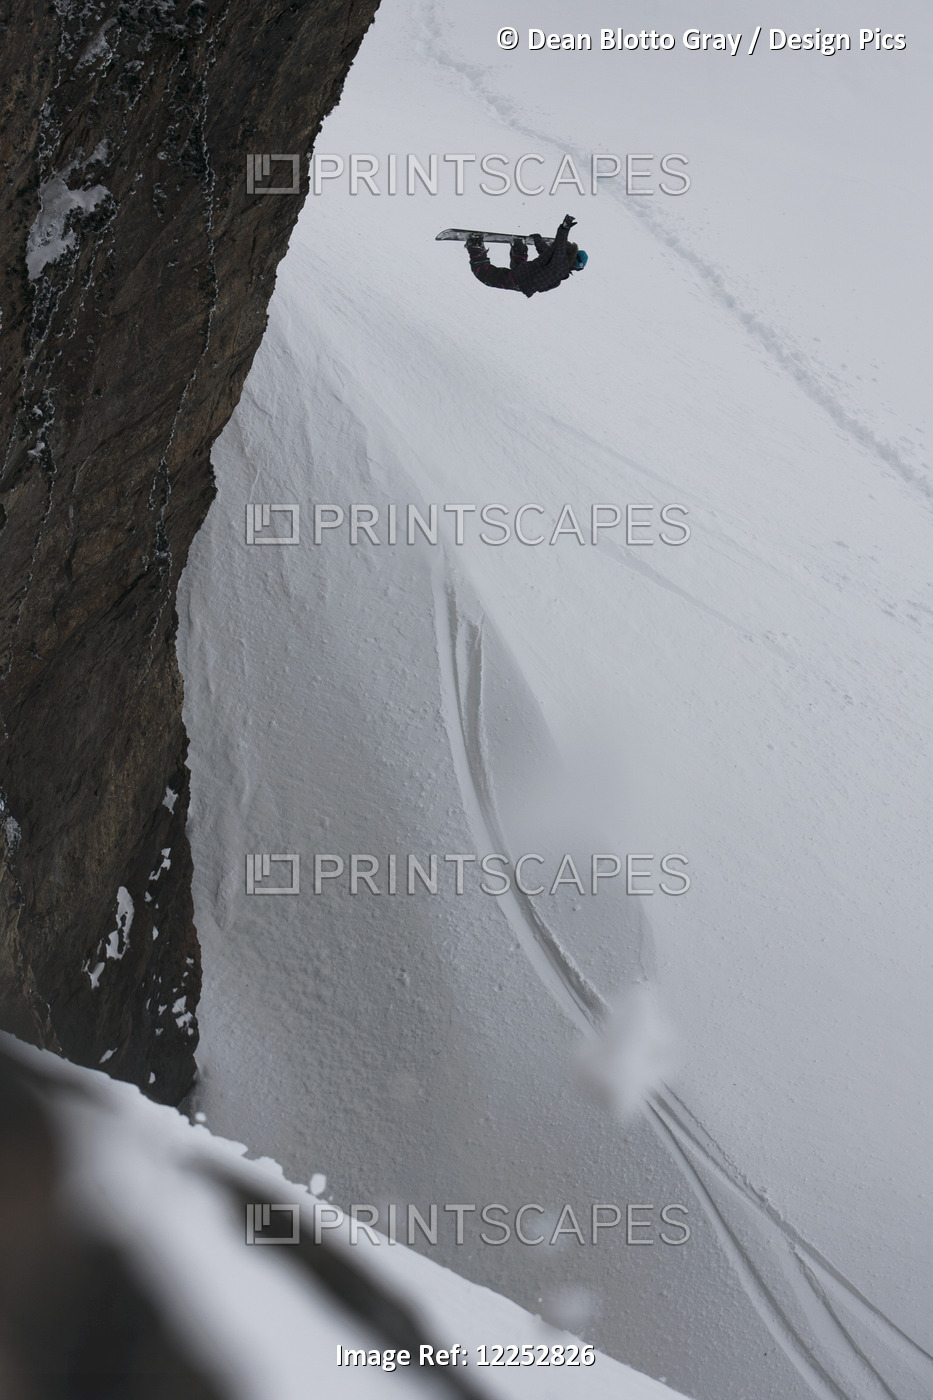 Professional Snowboarder Making An Extreme Jump Of A Vertical Wall Near ...